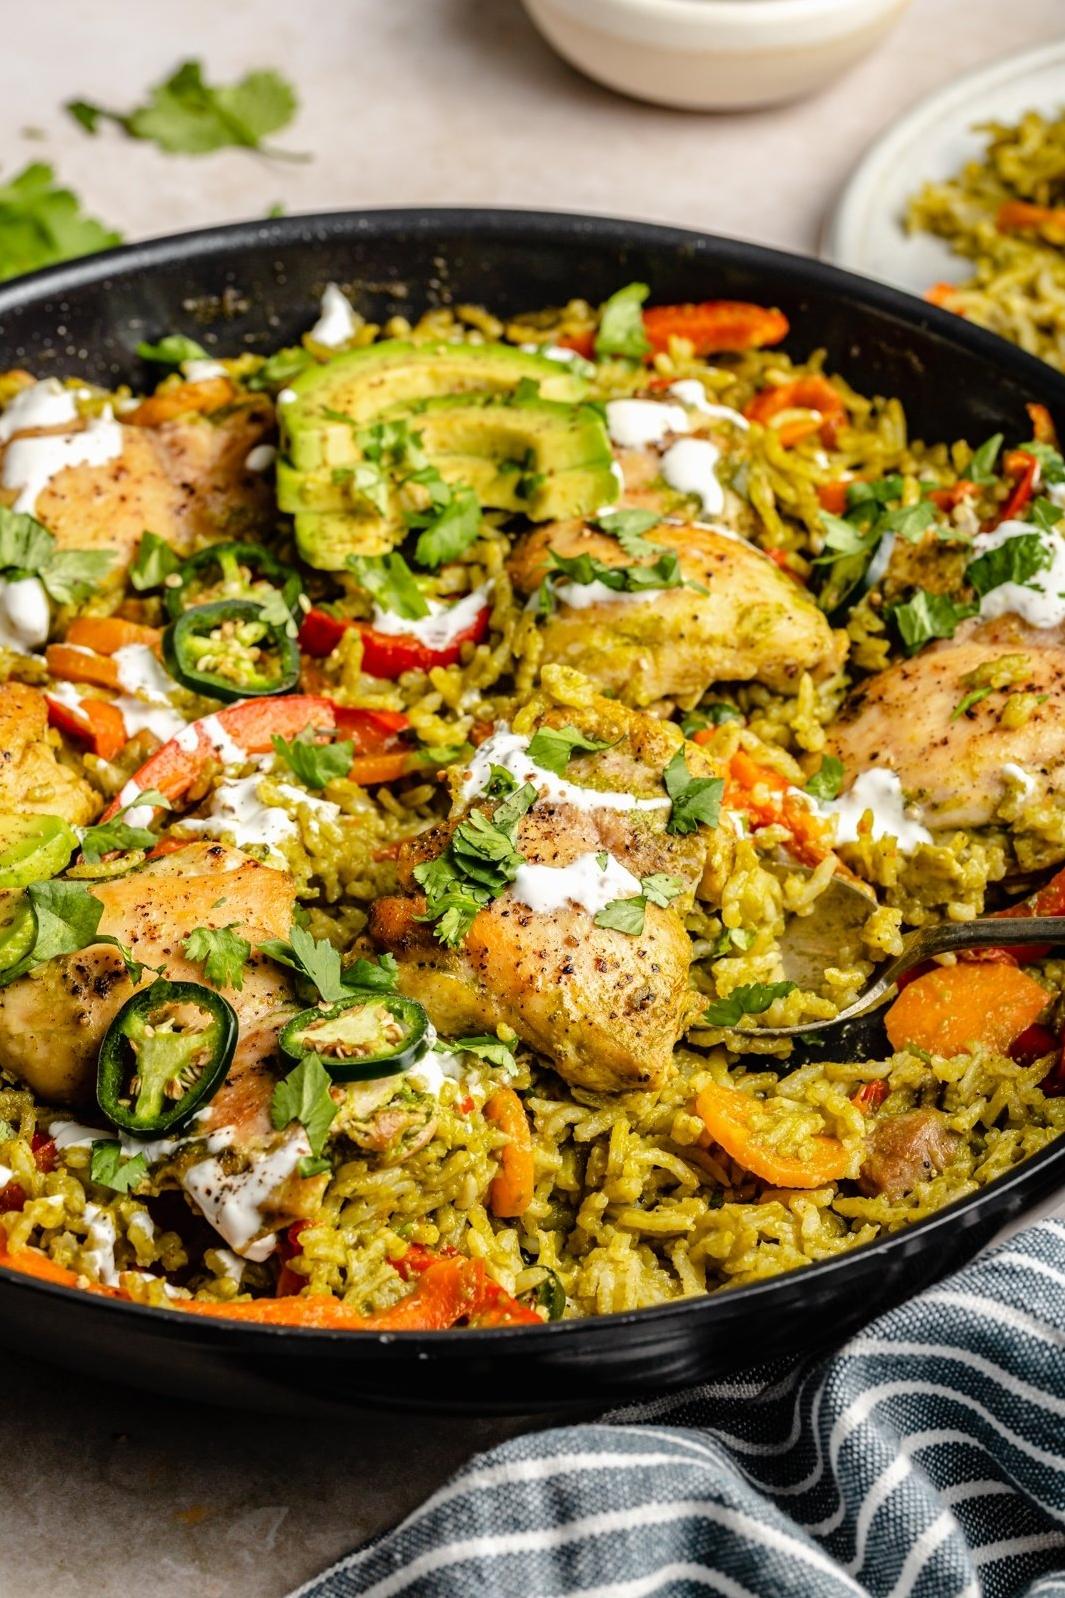  The vibrant colors of this dish will make your taste buds dance with joy.